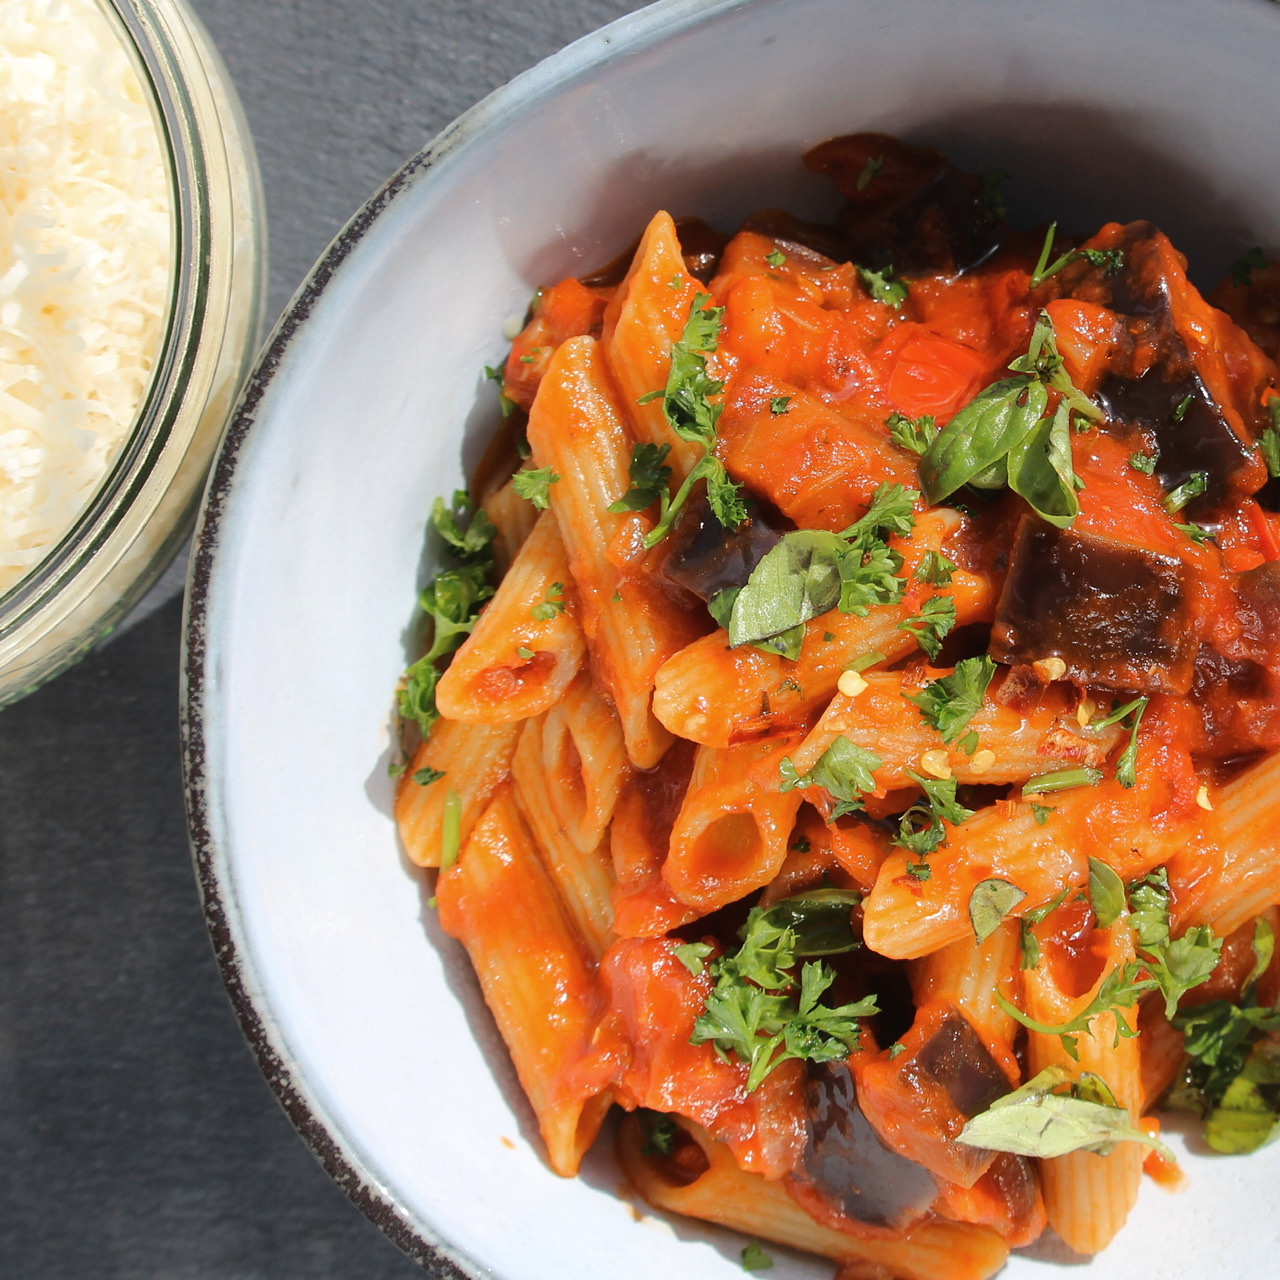 Spicy Eggplant and Pasta with Pancetta